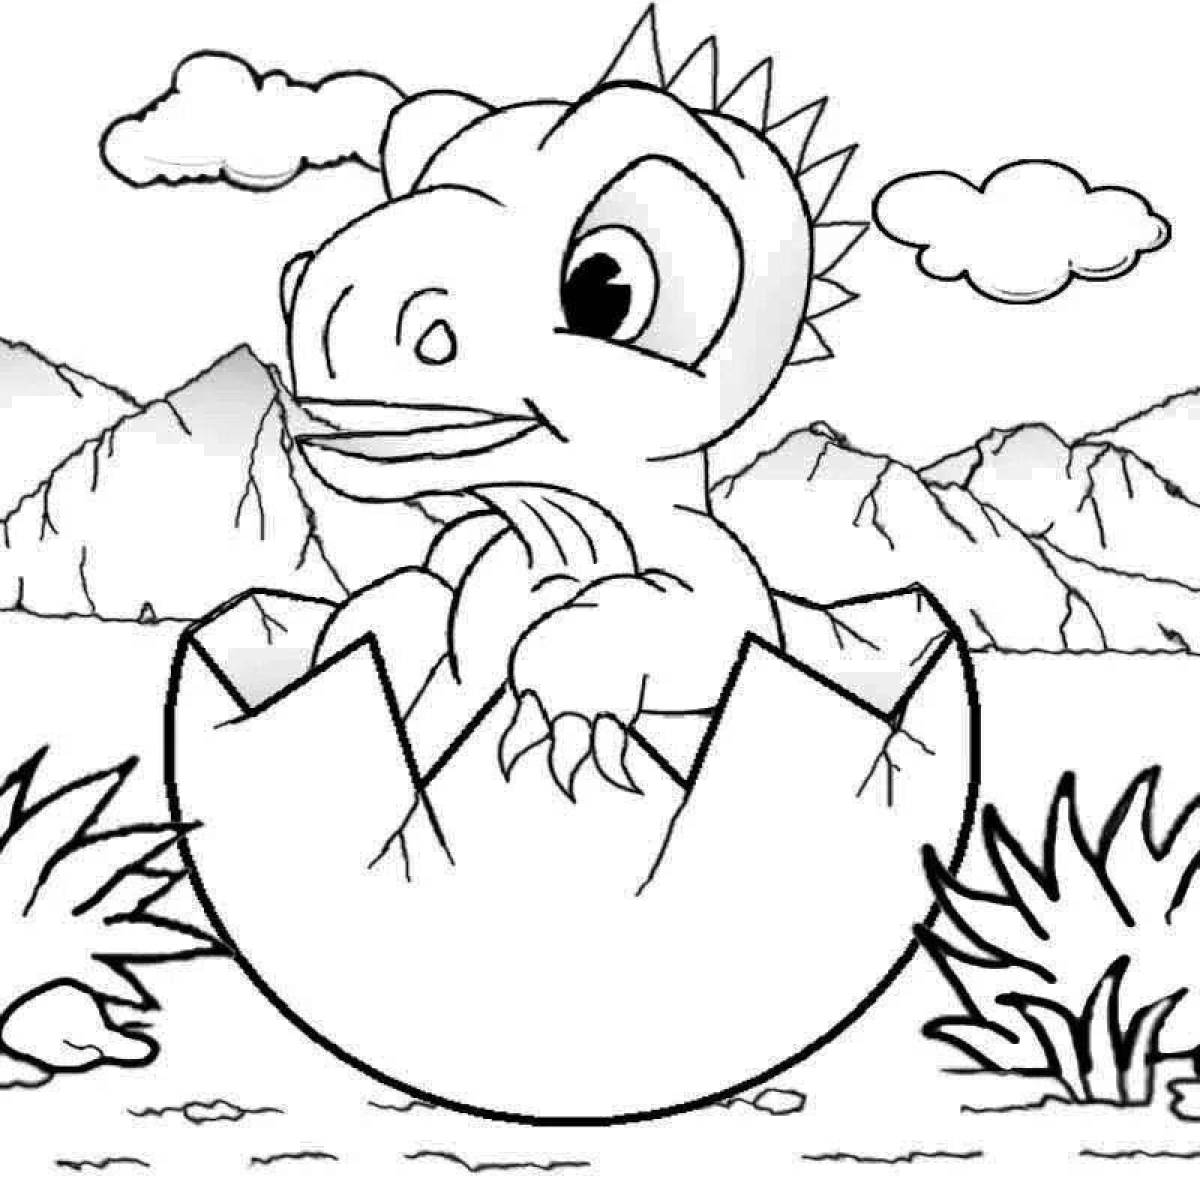 Great dino city coloring page